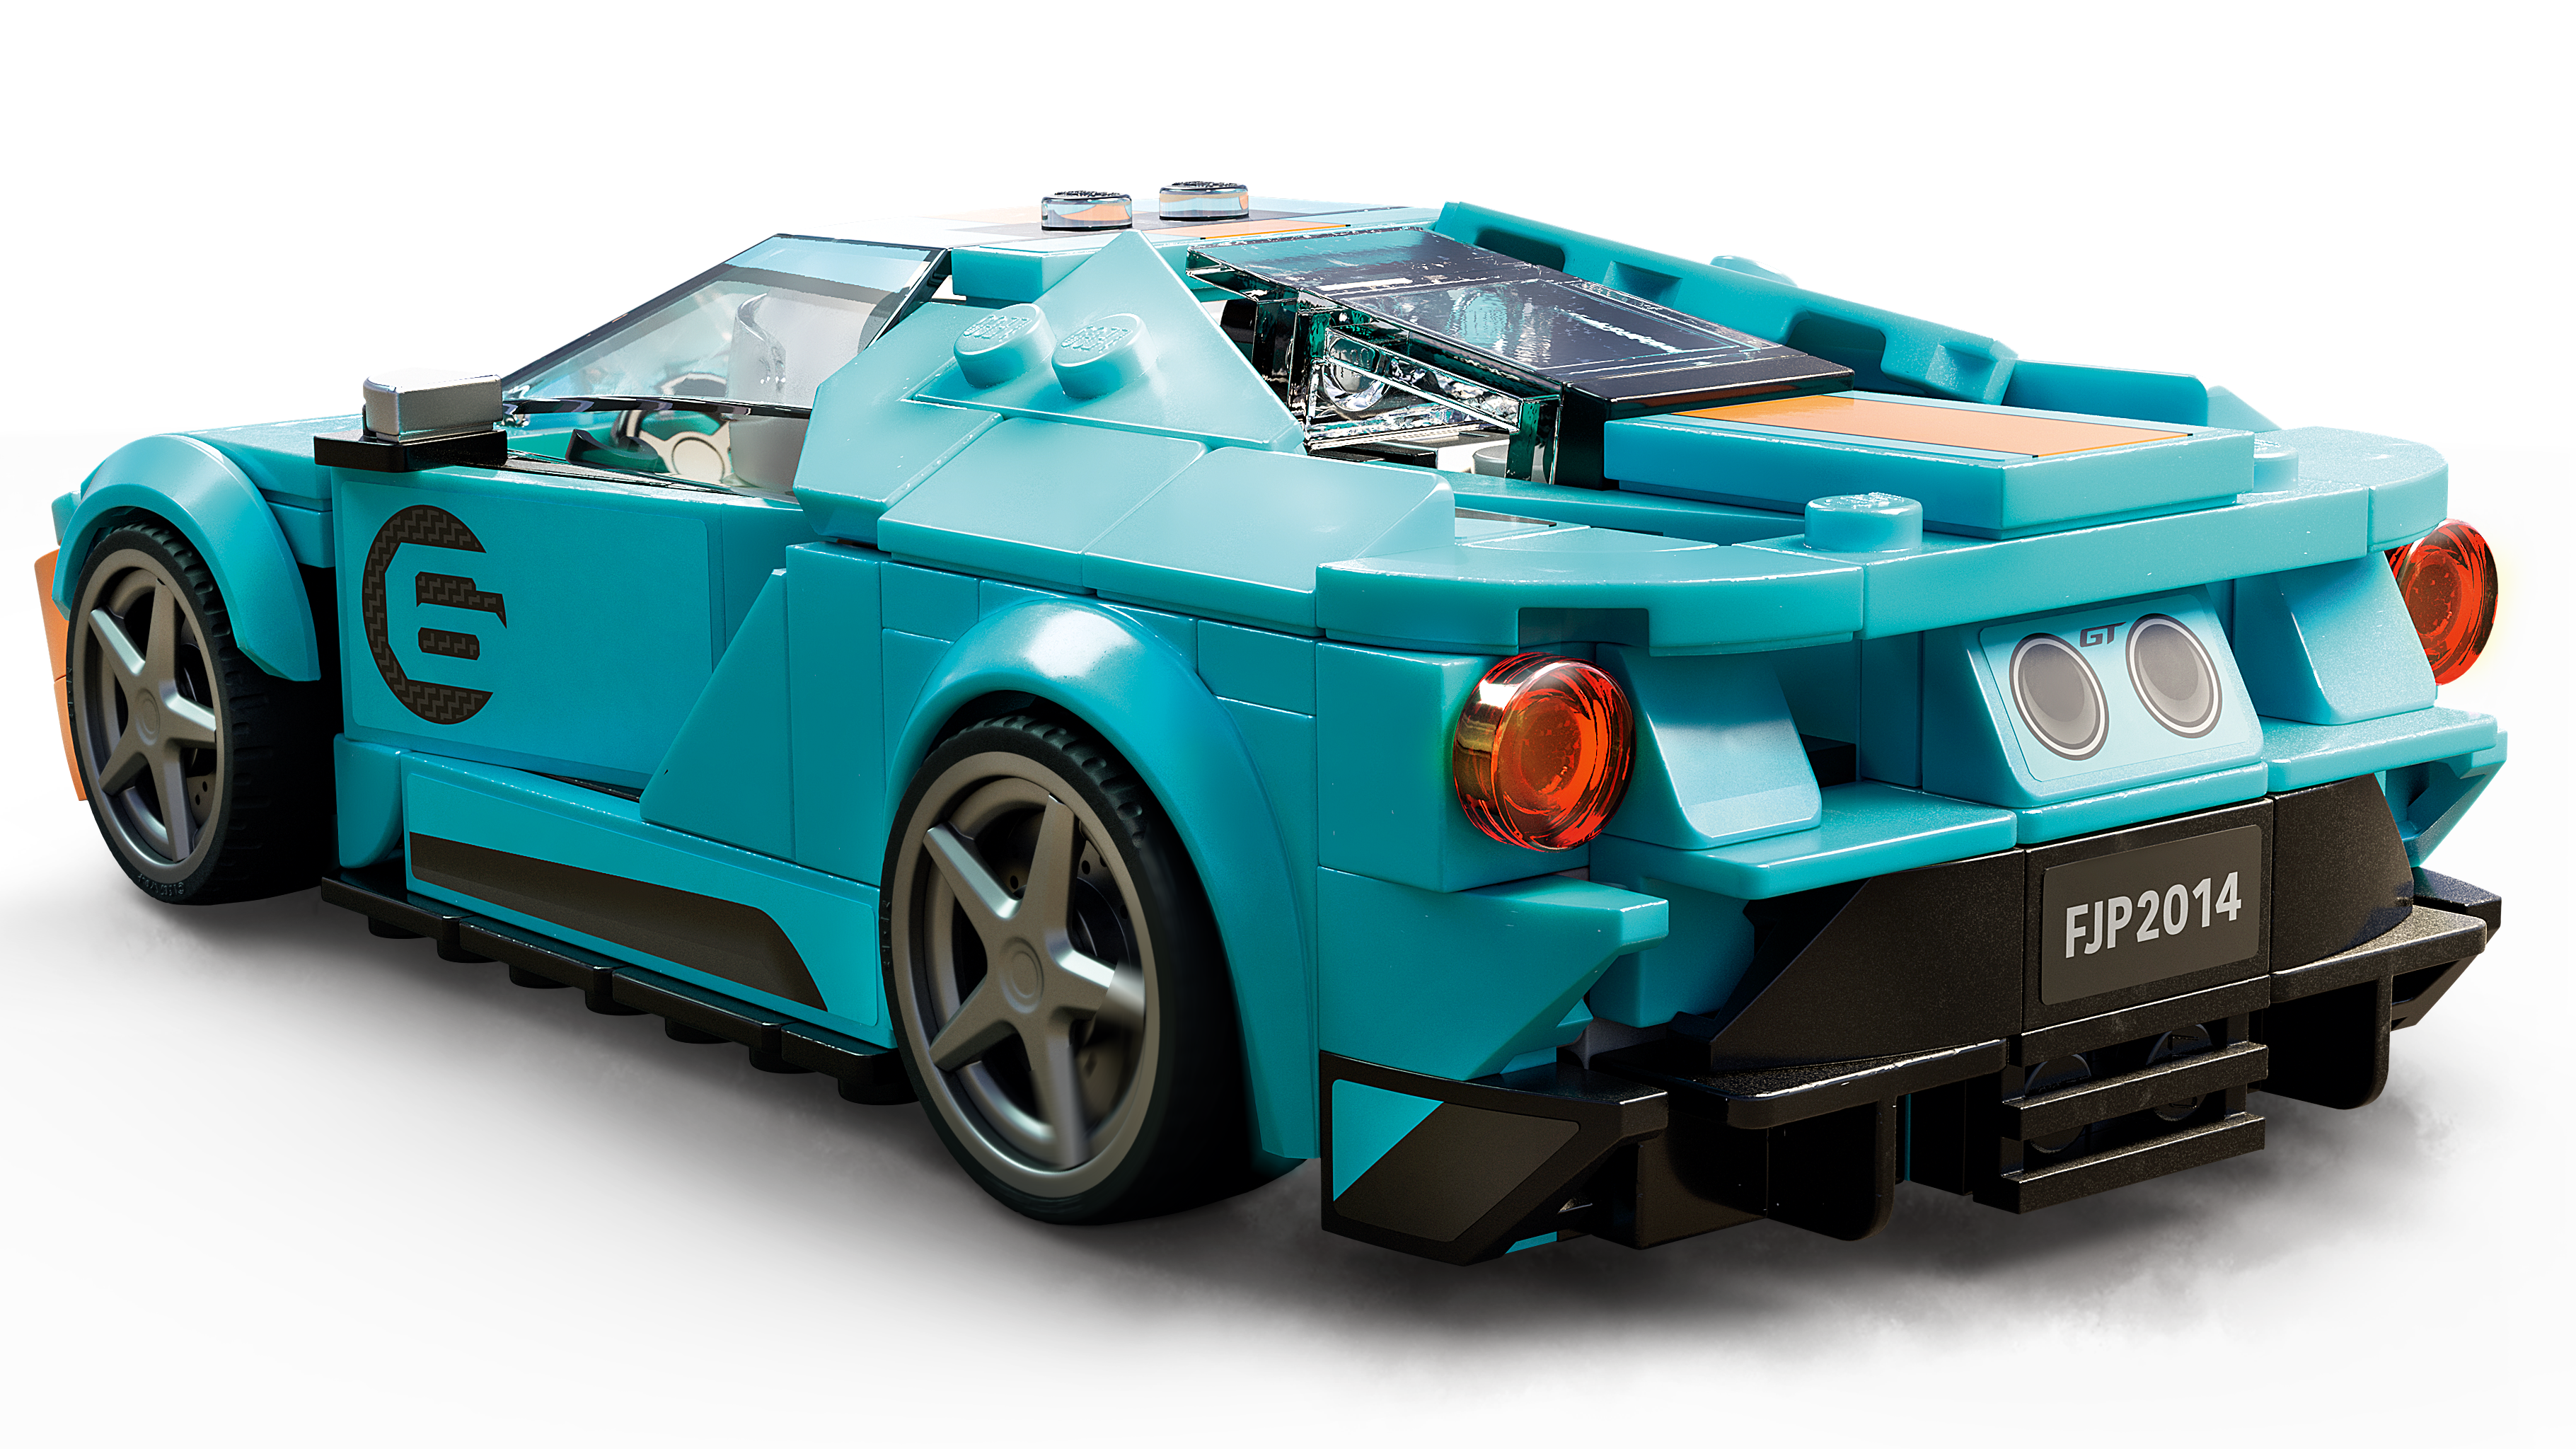  Lego Speed Champions Ford GT Heritage Edition and